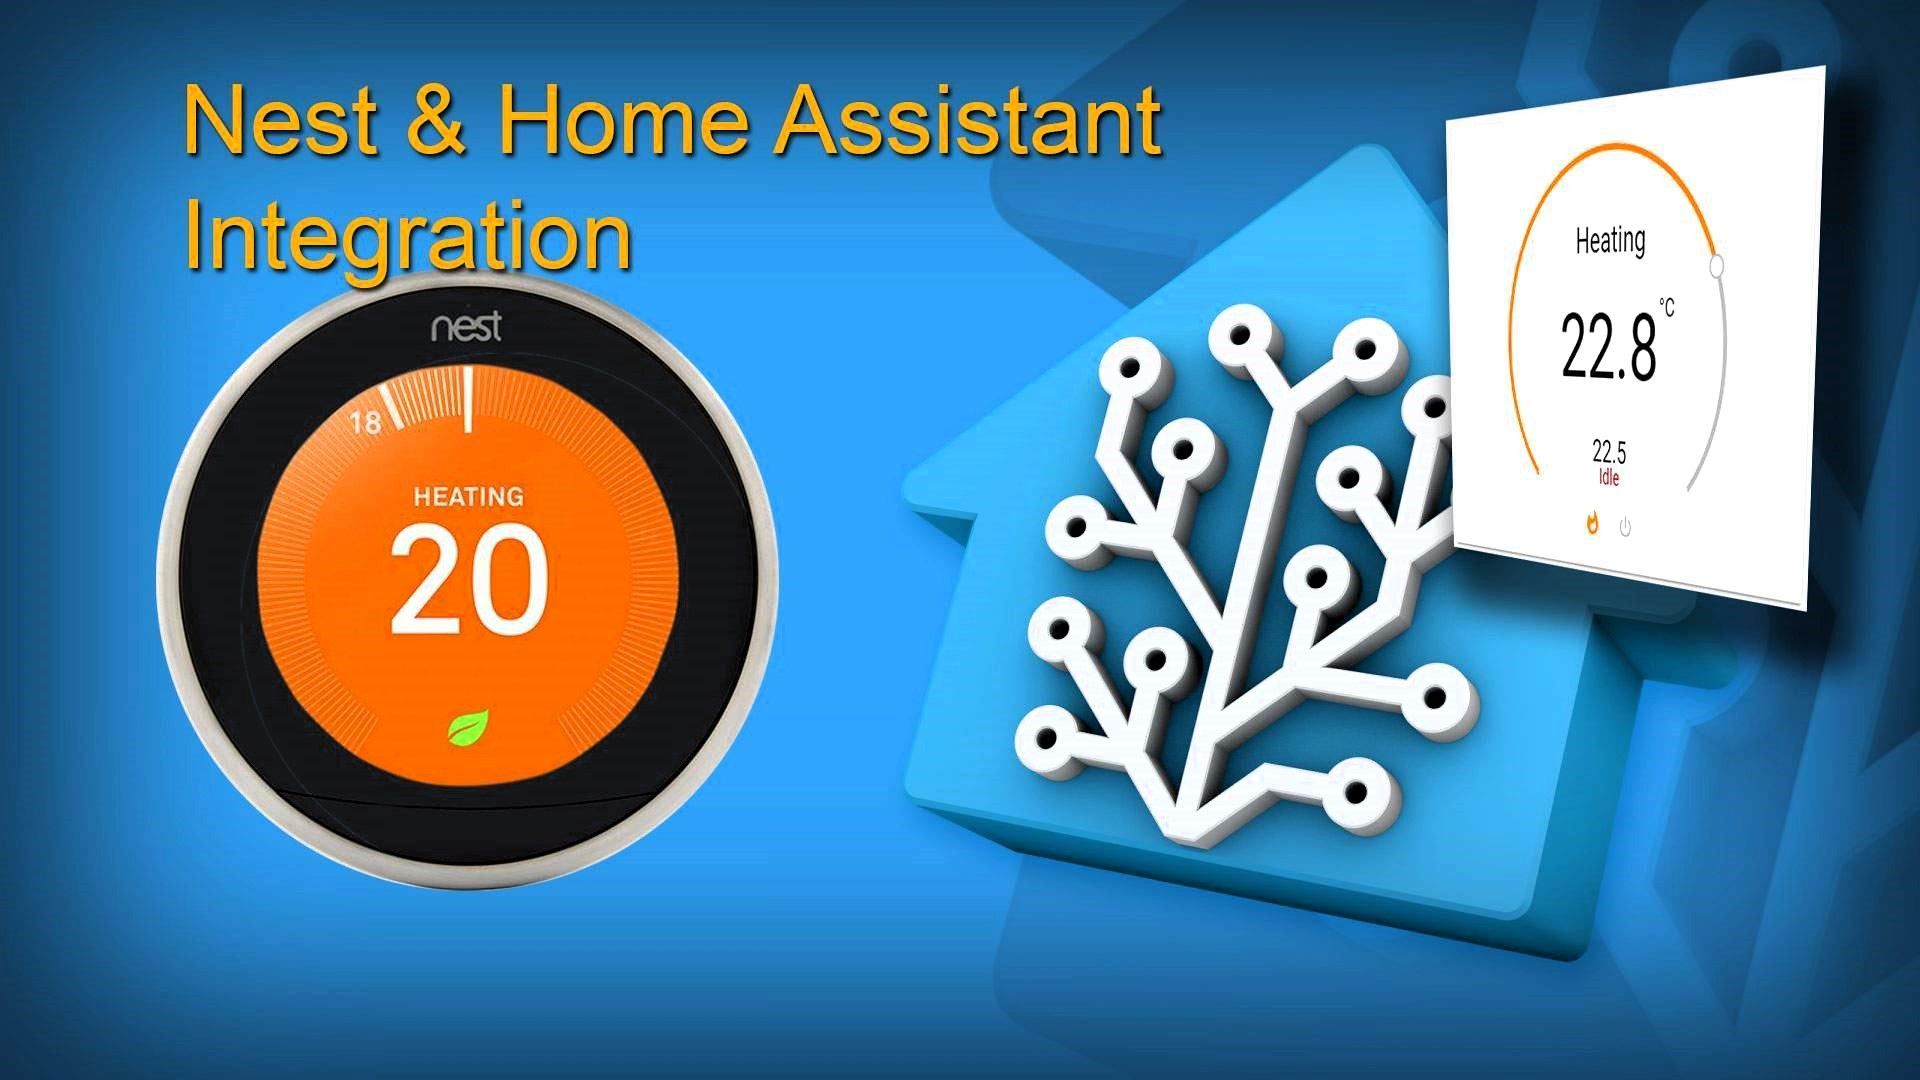 does home assistant work with nest